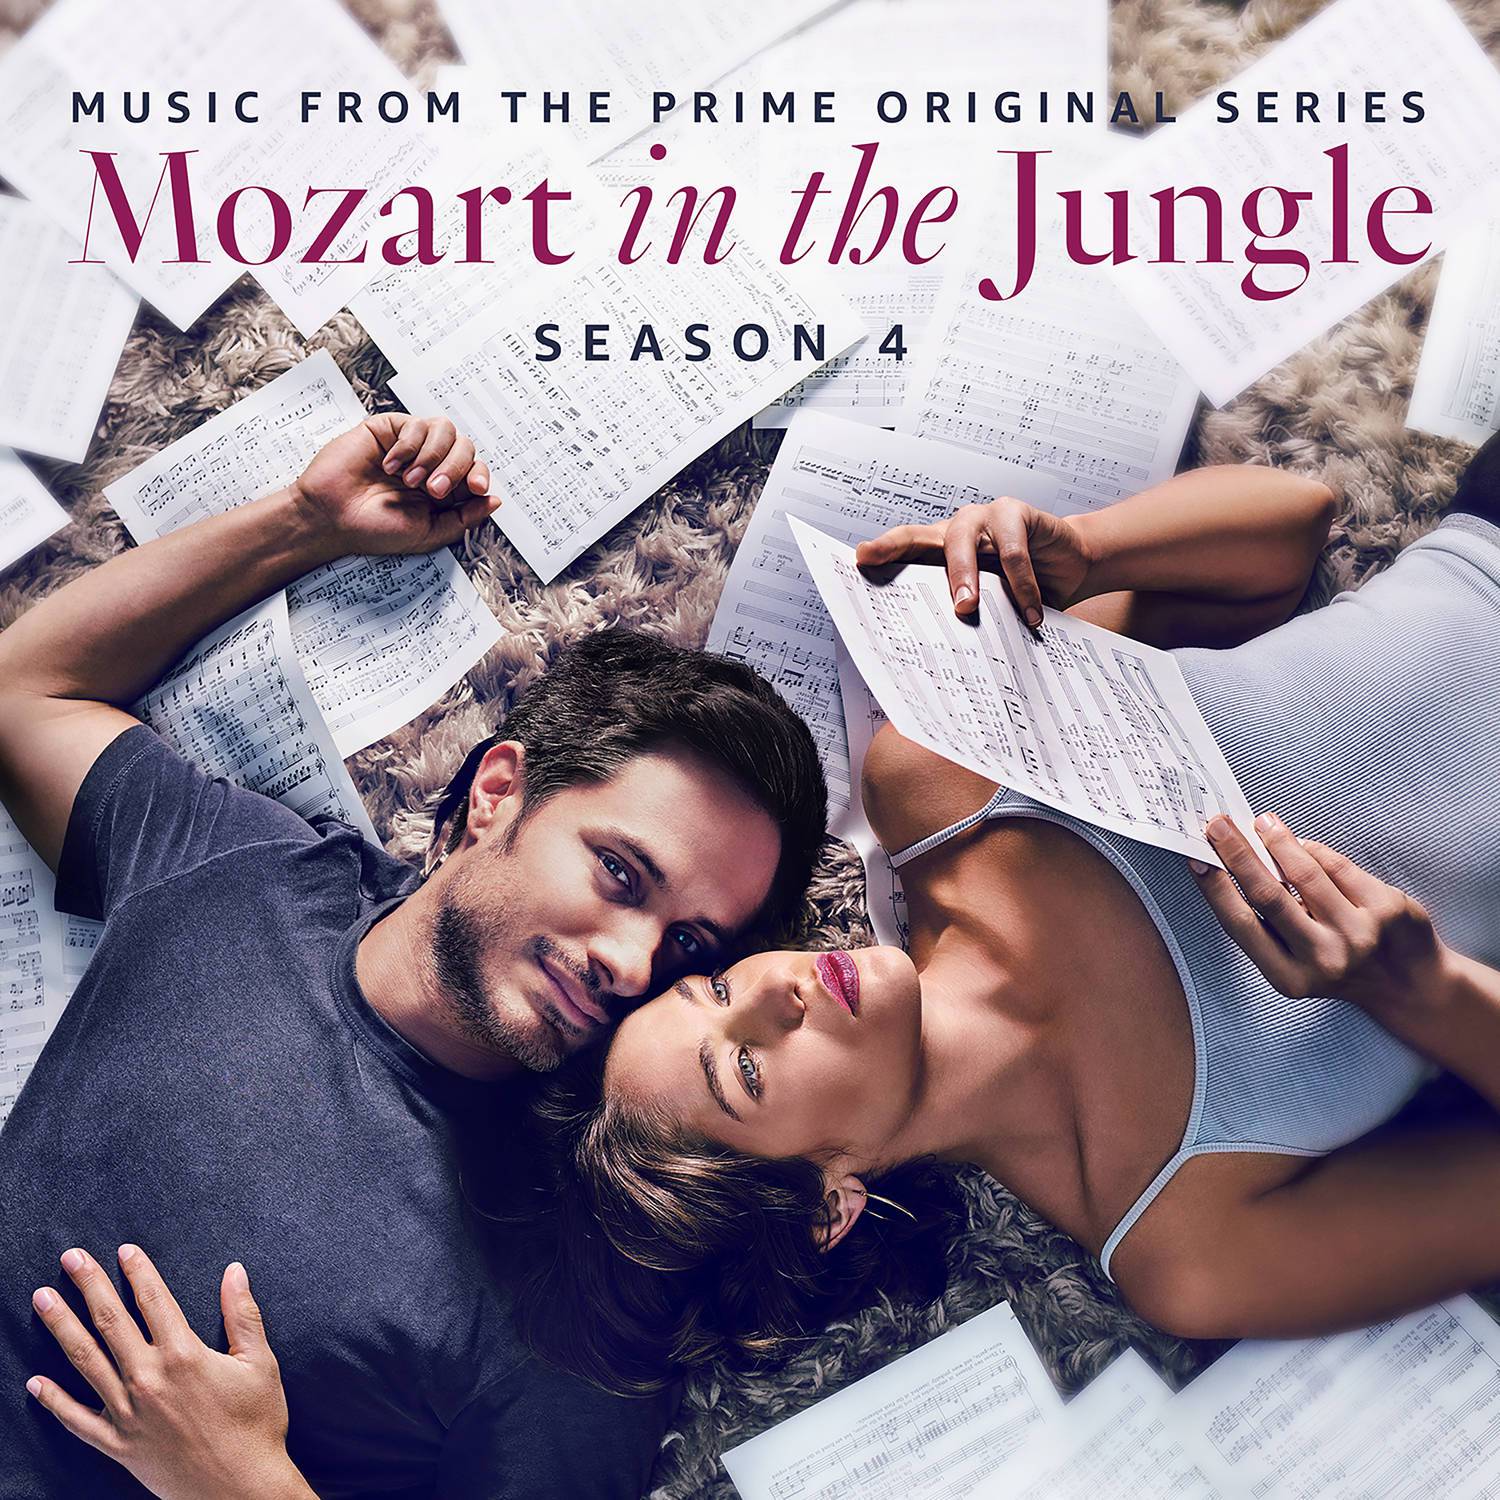 Mozart in the Jungle - Season 4 (Music from the Prime Original Series)